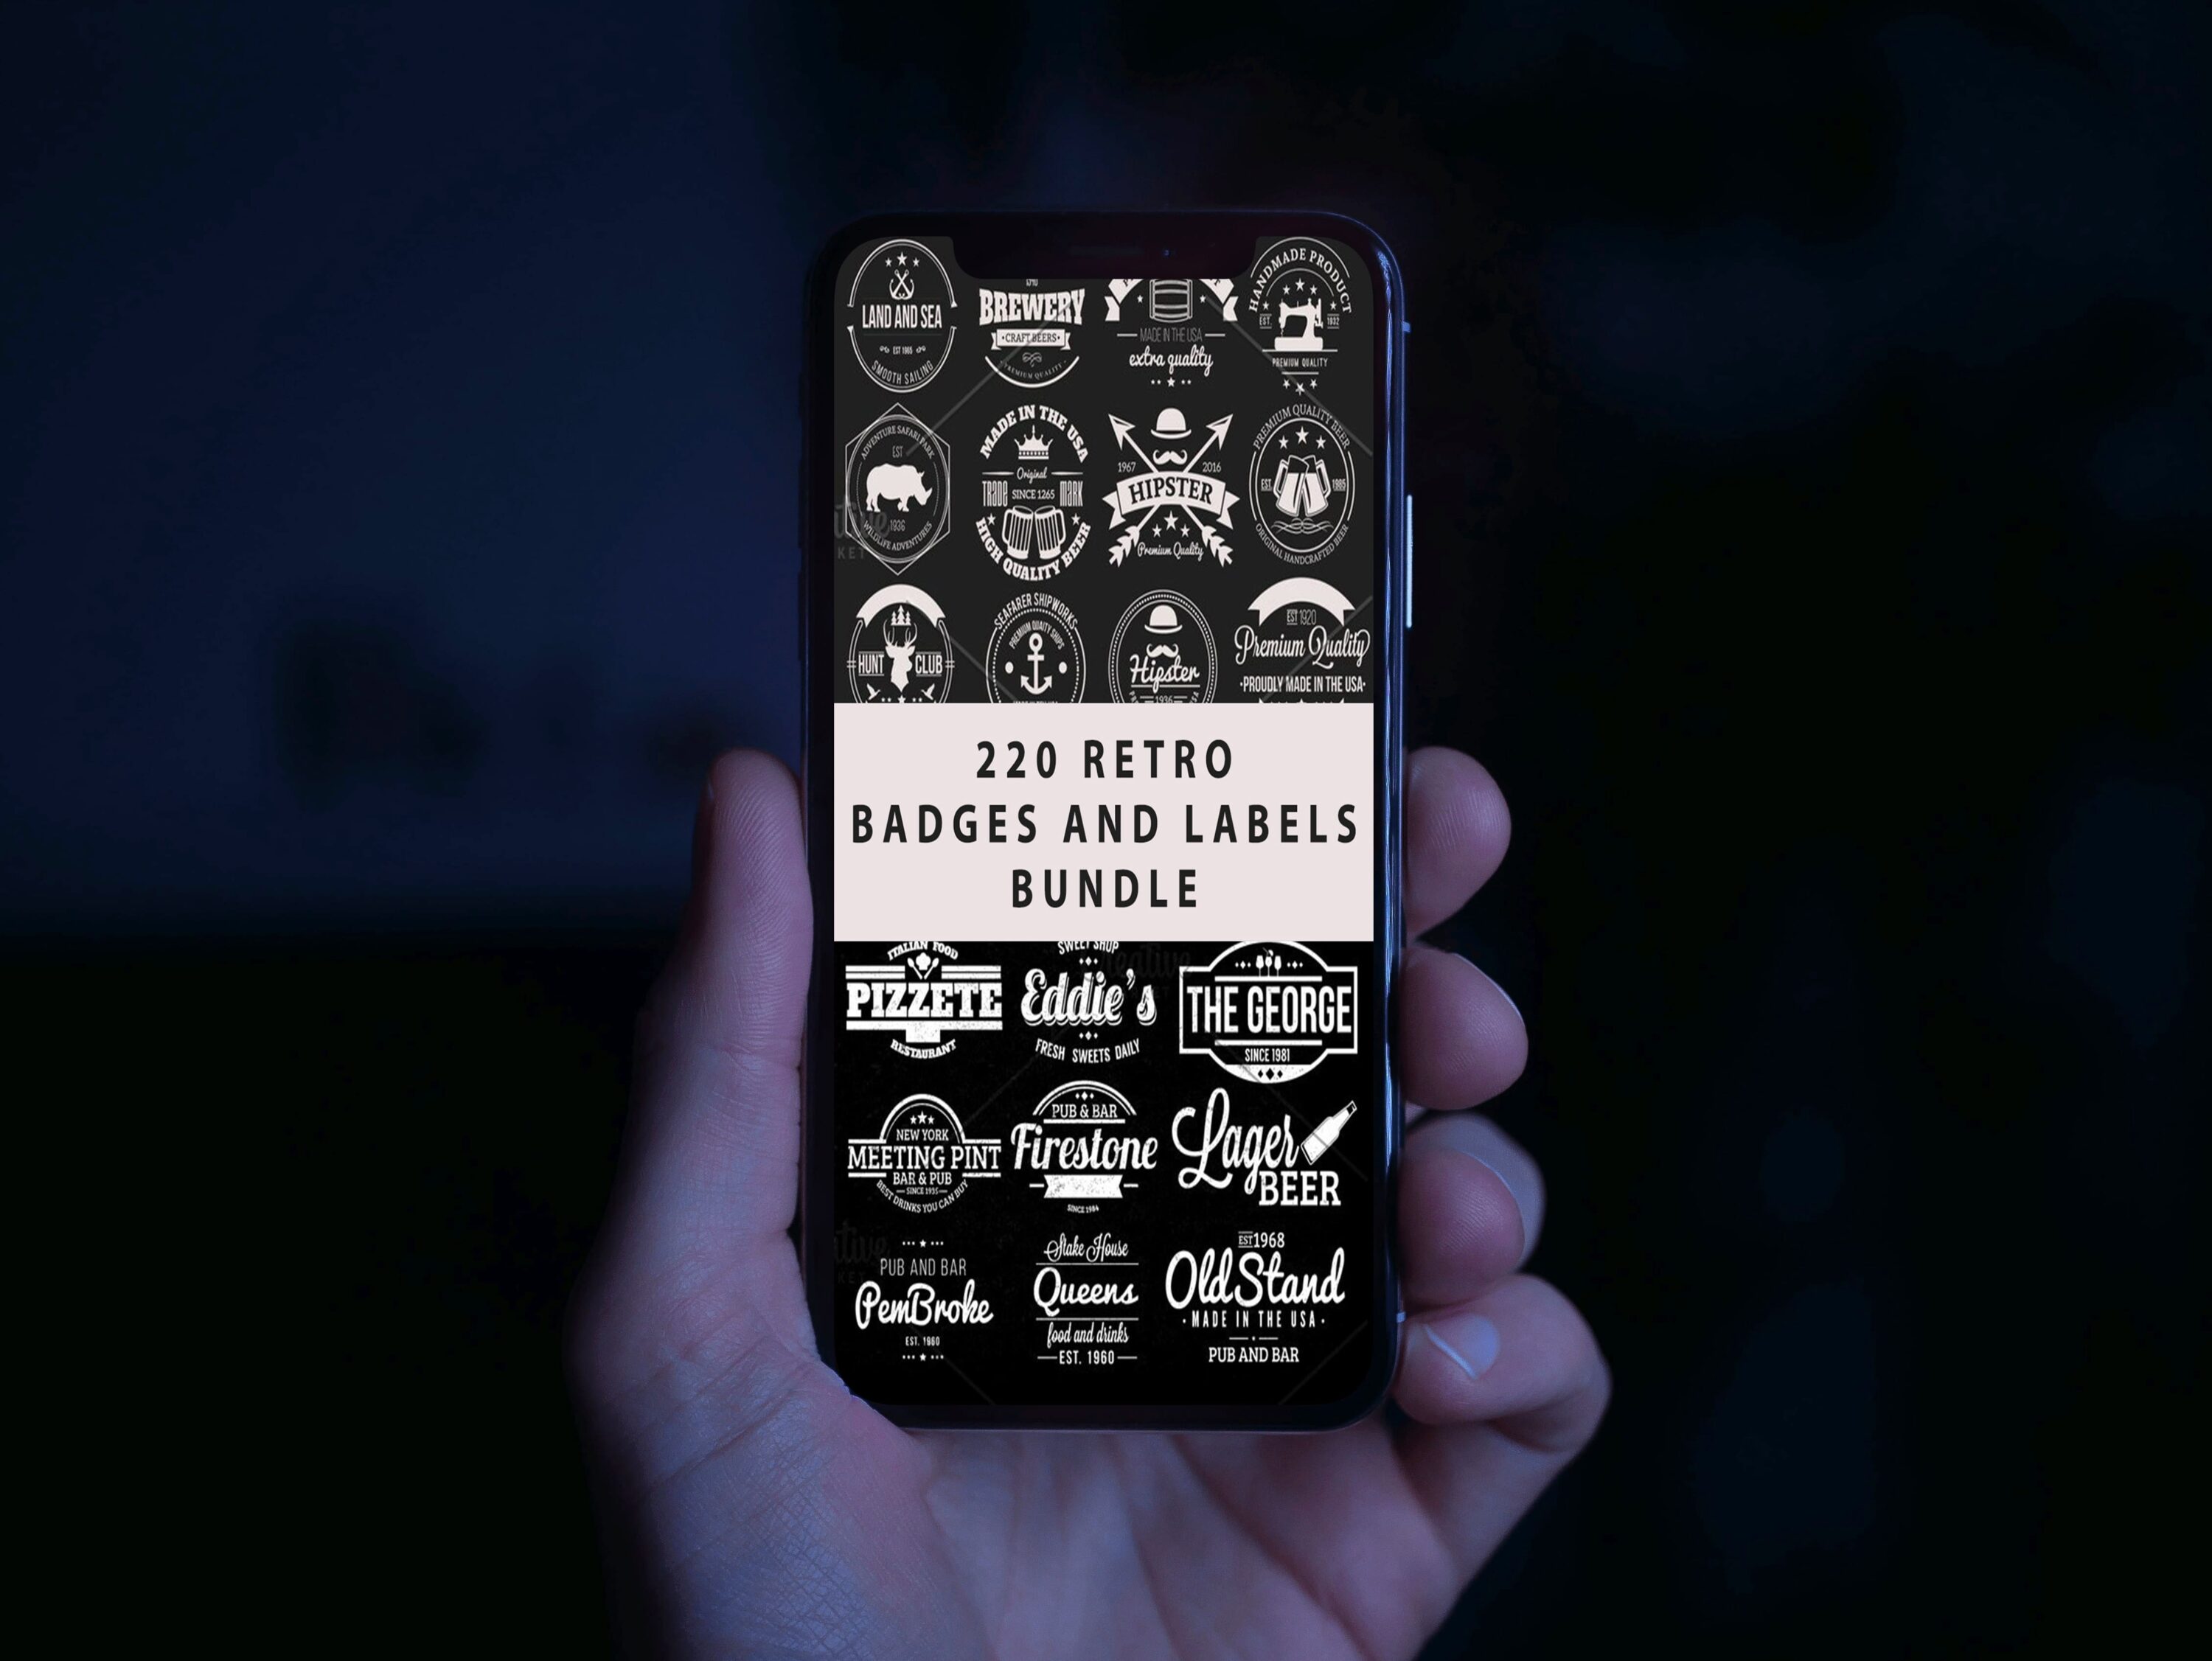 Mobile option of the 220 Retro Badges and Labels Bundle.